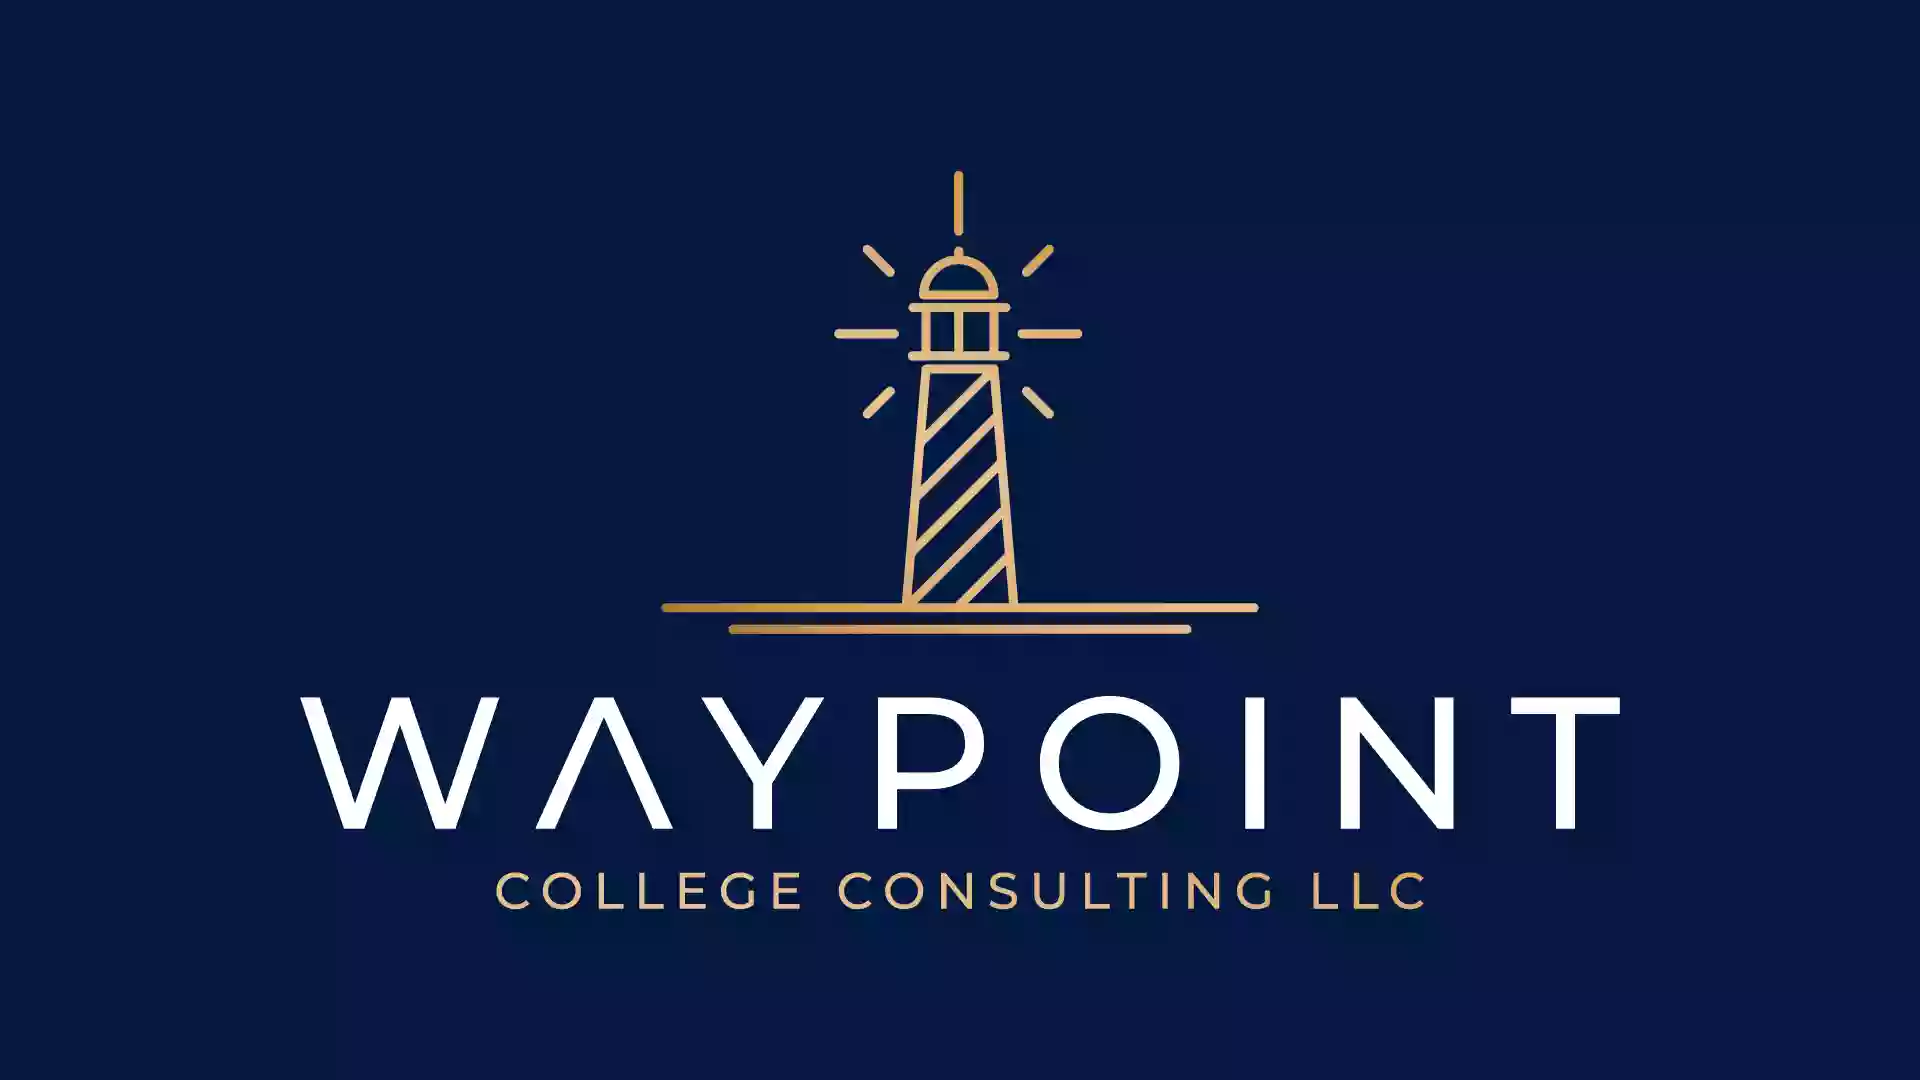 Waypoint College Consulting, LLC